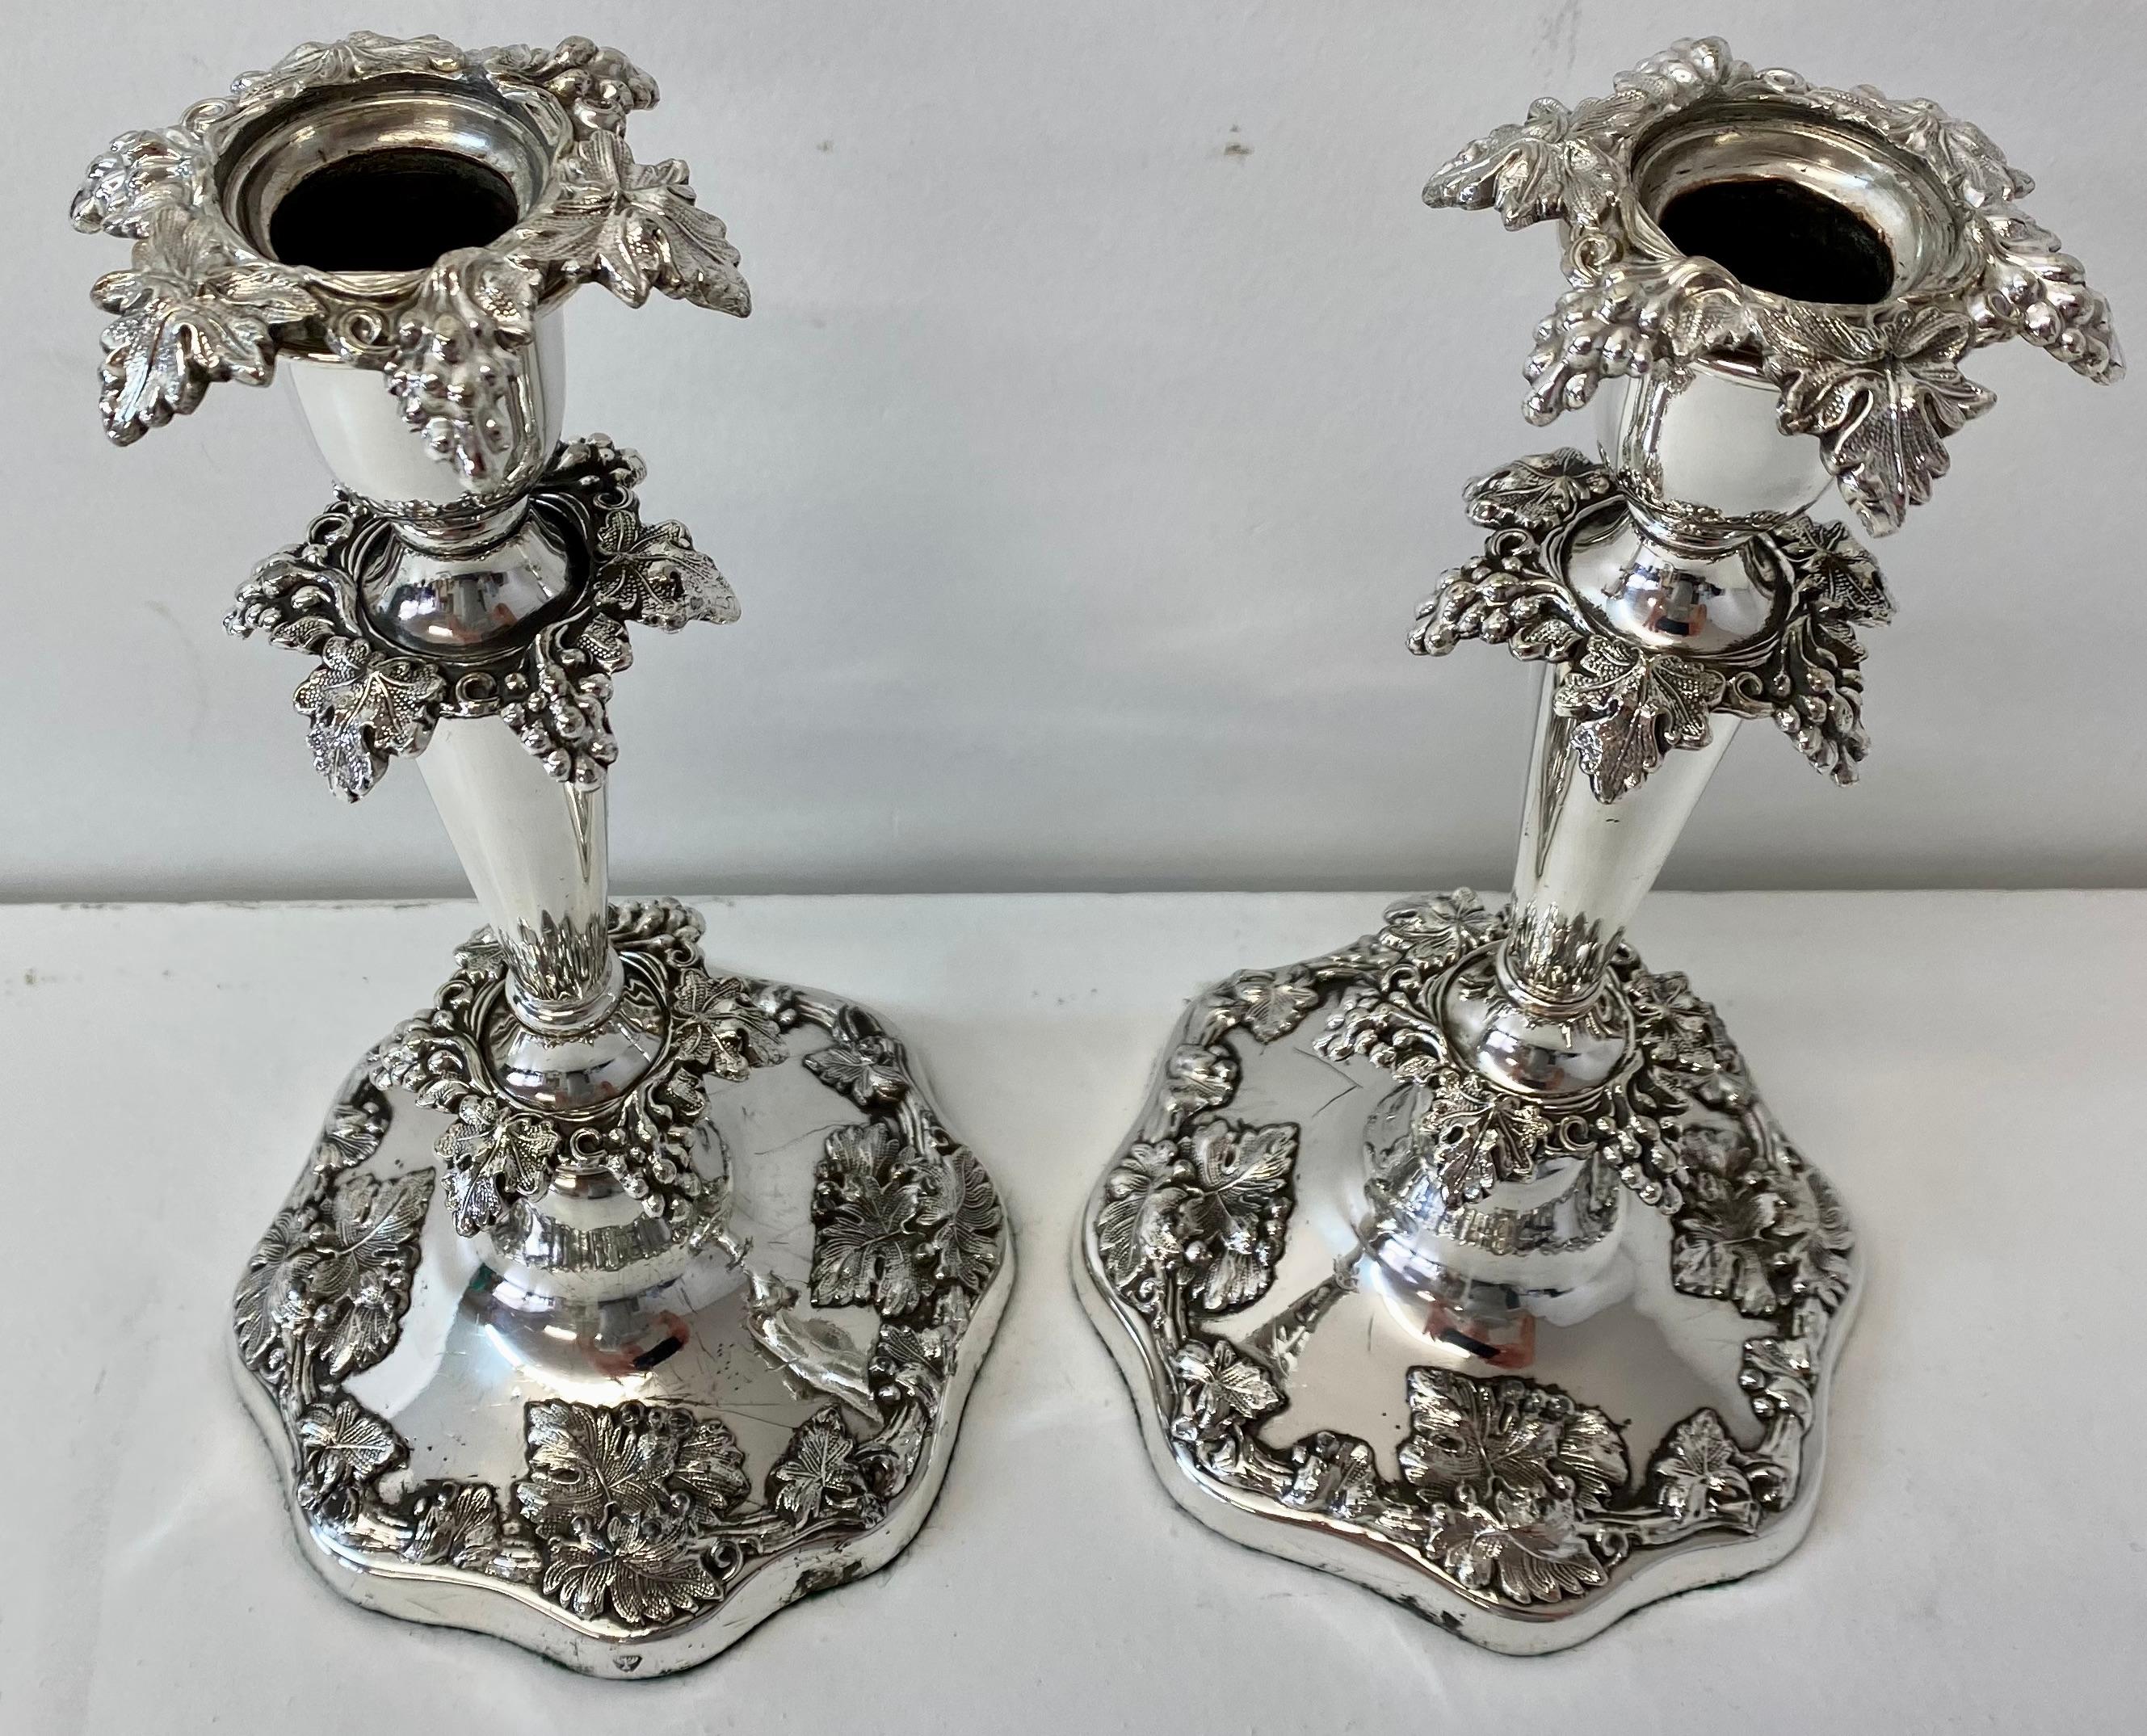 Sheffield silver plate candle holders w/ sterling silver mounts, mid 20th c.

Measures: 4.75